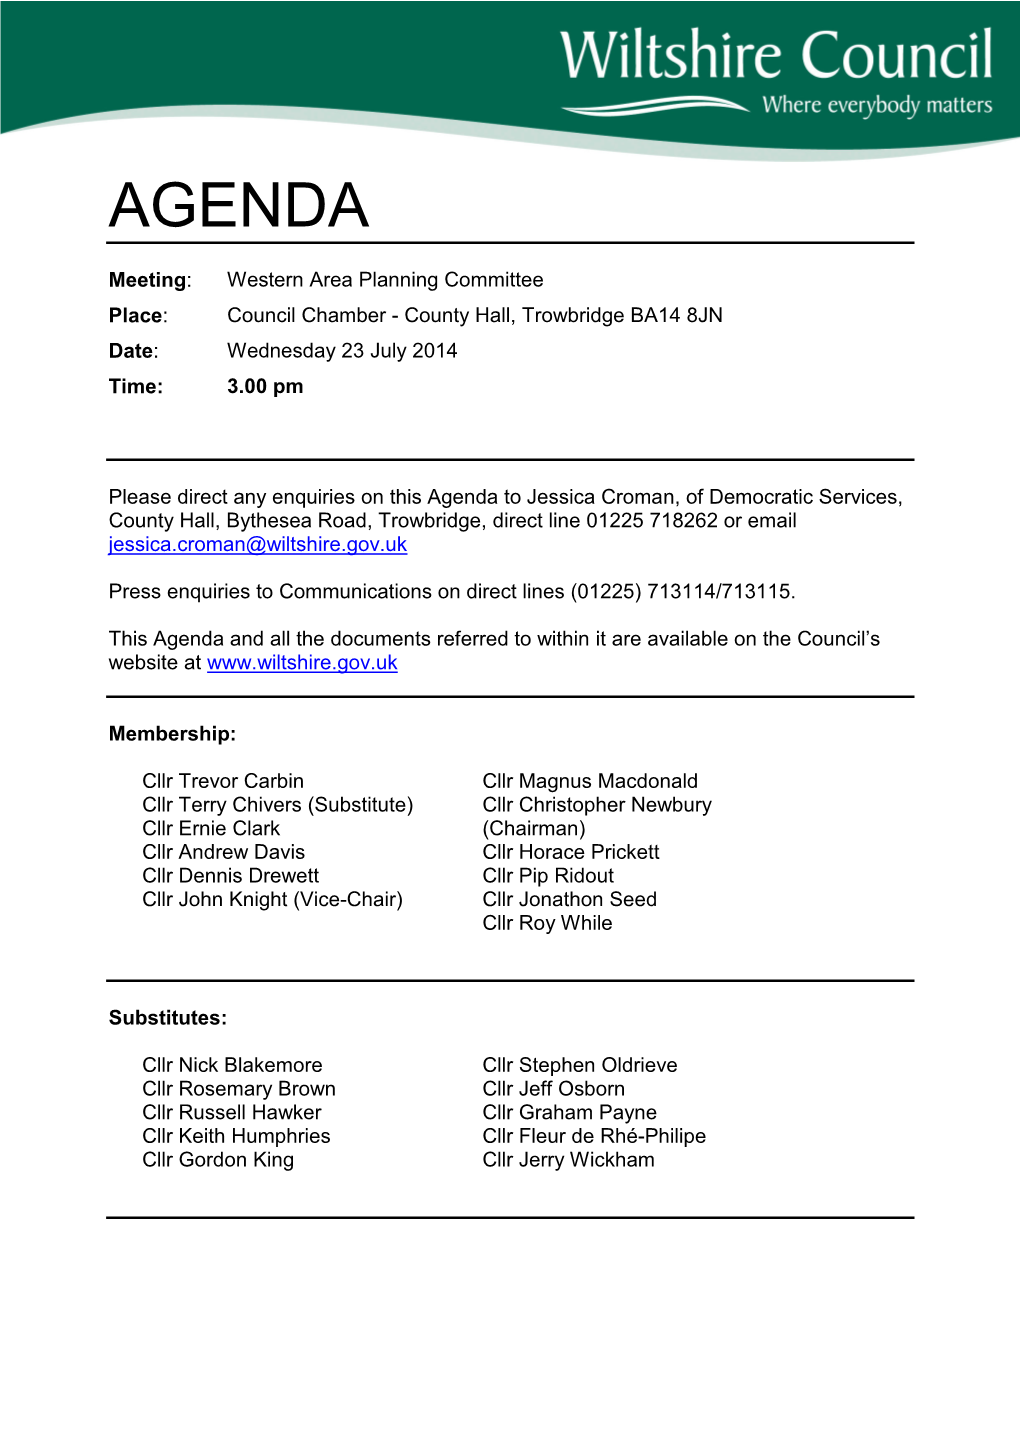 (Public Pack)Agenda Document for Western Area Planning Committee